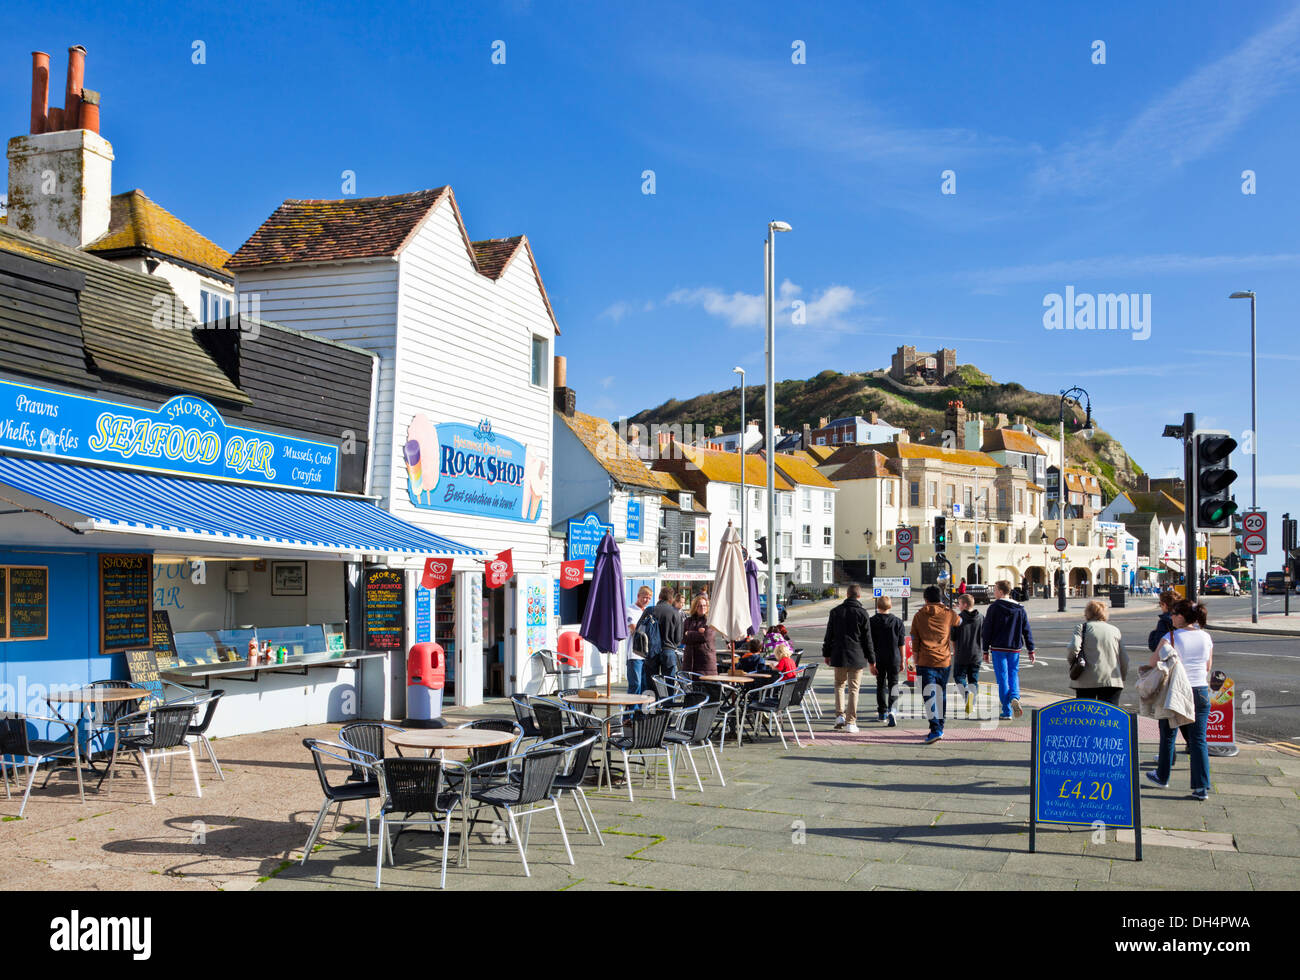 Seafood bar shop cafe on Hastings old town East Sussex England UK GB EU Europe Stock Photo